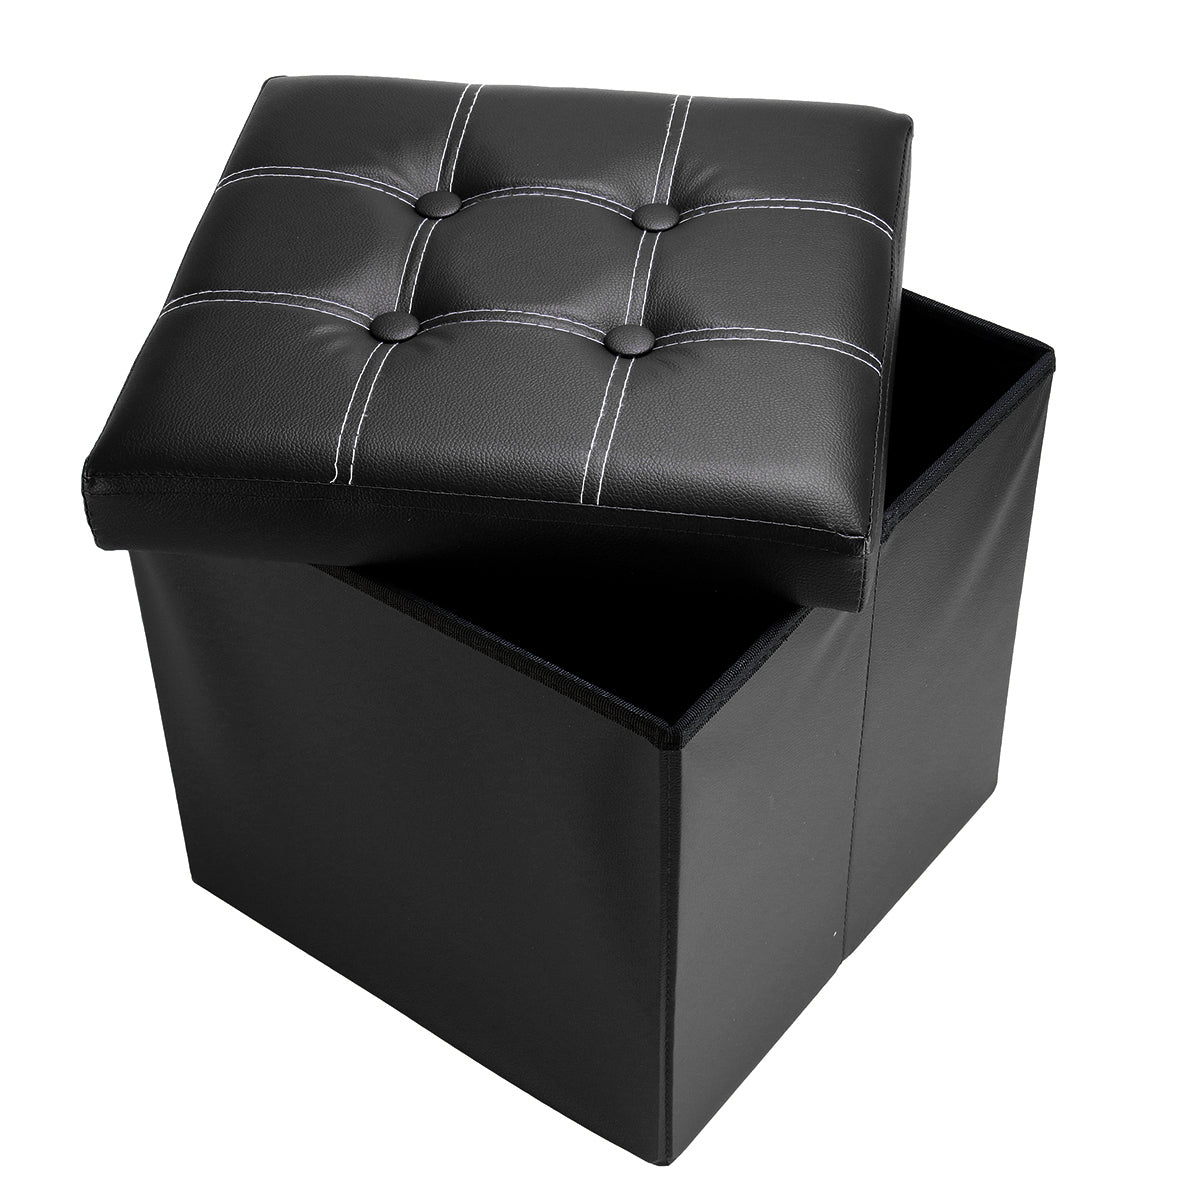 PU Leather Storage Stool Multifunctional Sofa Ottoman Footrest Box Seat Footstool Square Chair Home Office Furniture